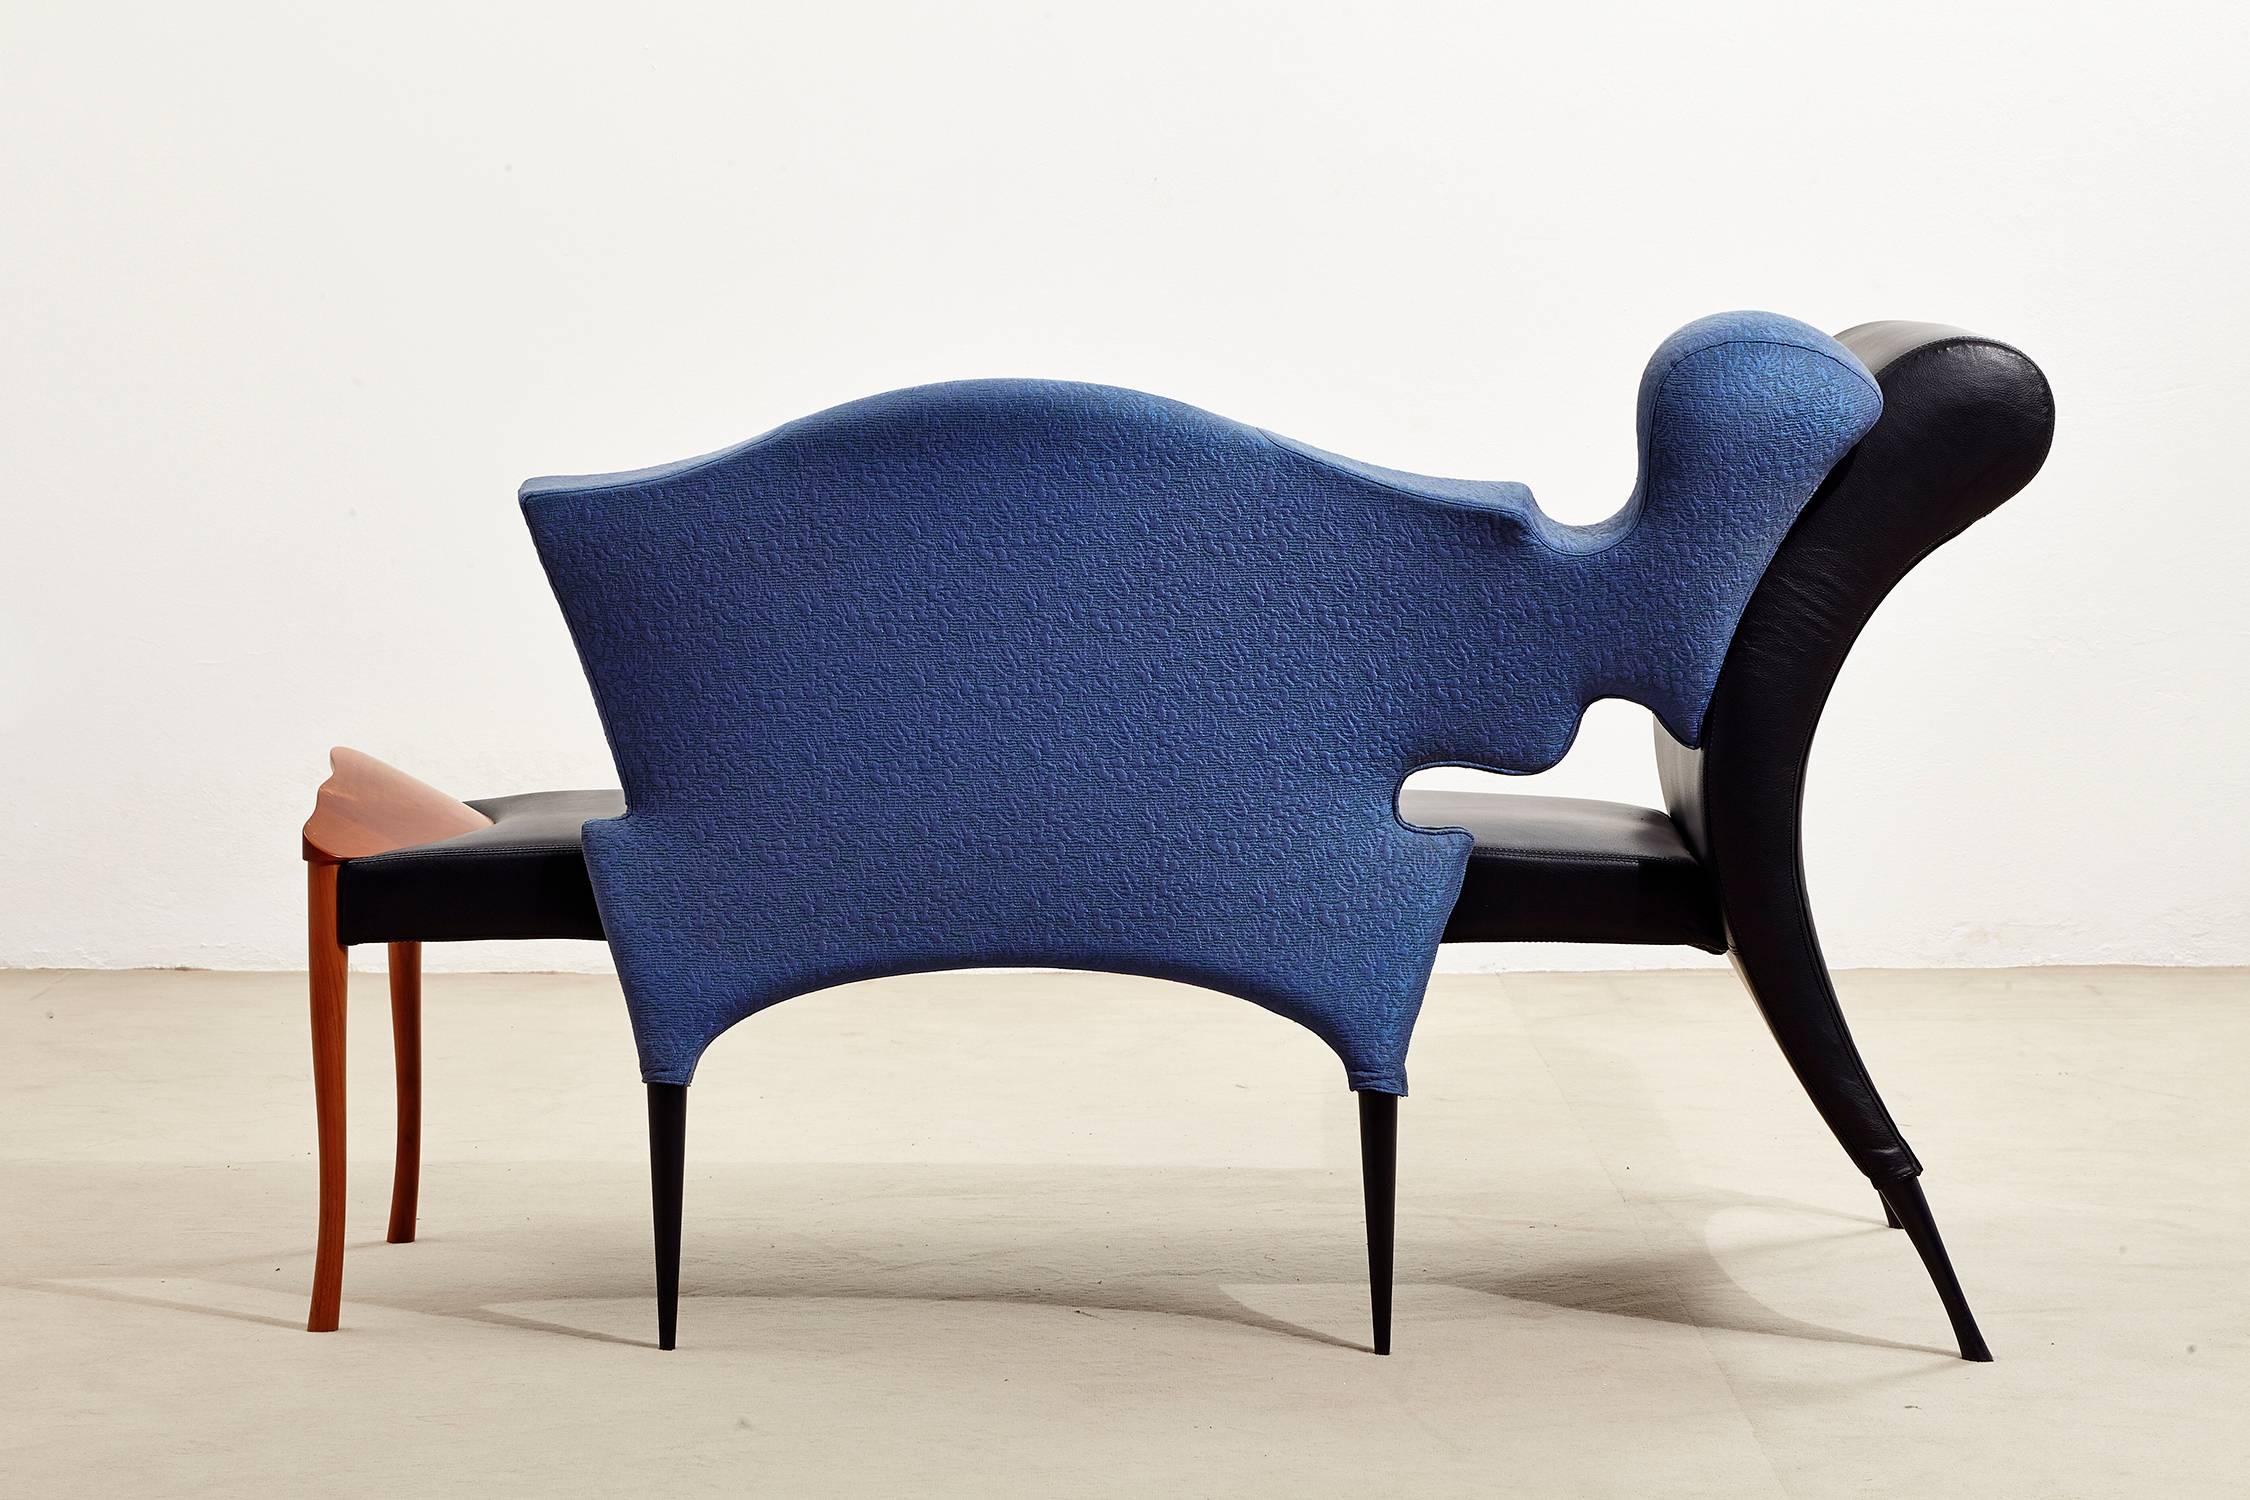 Italian Chaise Longue Designed by Borek Sipek for Driade in 1990, Now Out of Production